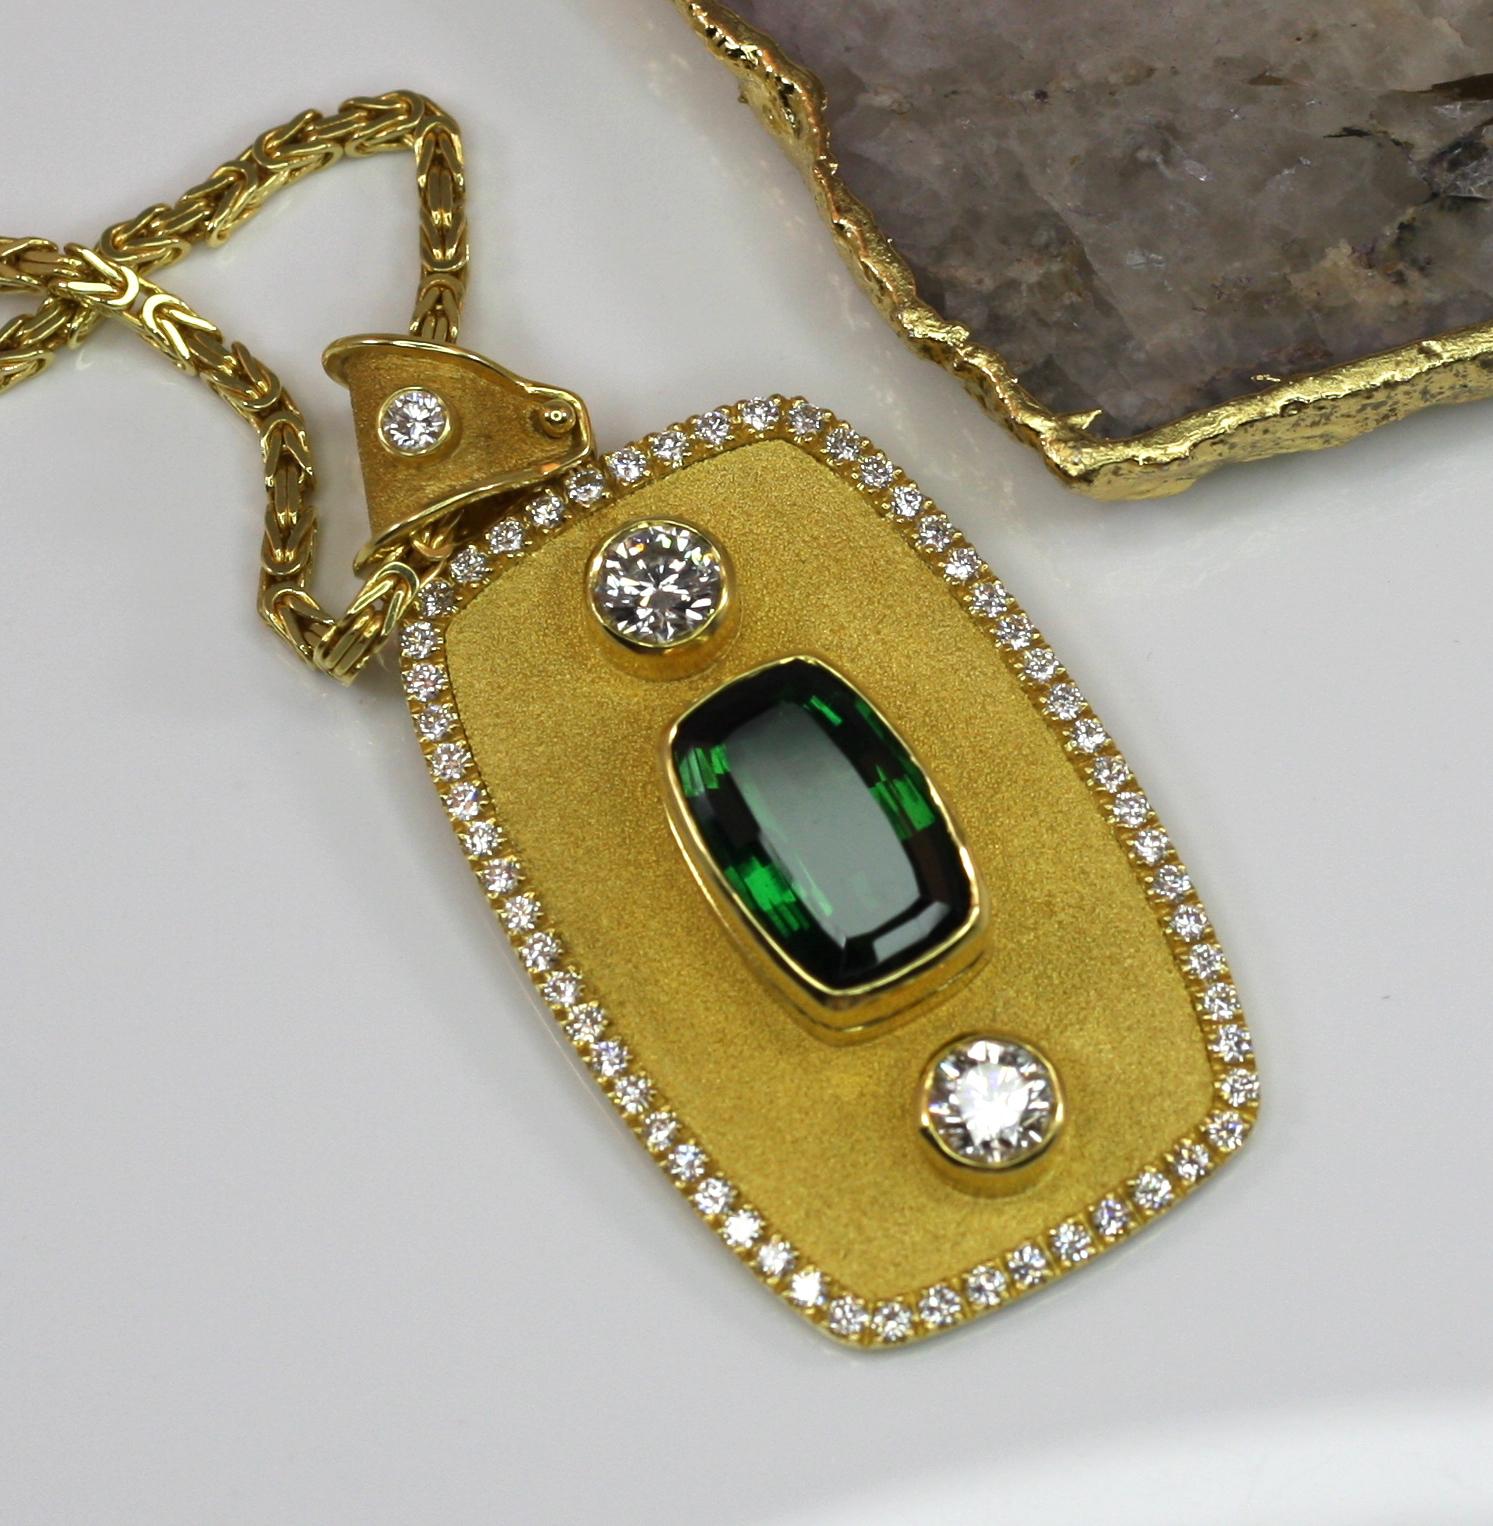 Heavy pendant by S.Georgios designer was handmade from solid 18 Karat Yellow Gold and is microscopically decorated with the Byzantine velvet background. The pendant features exclusive 11.63 Carat Cushion Cut Green Turmaline and 2 Brilliant cut White